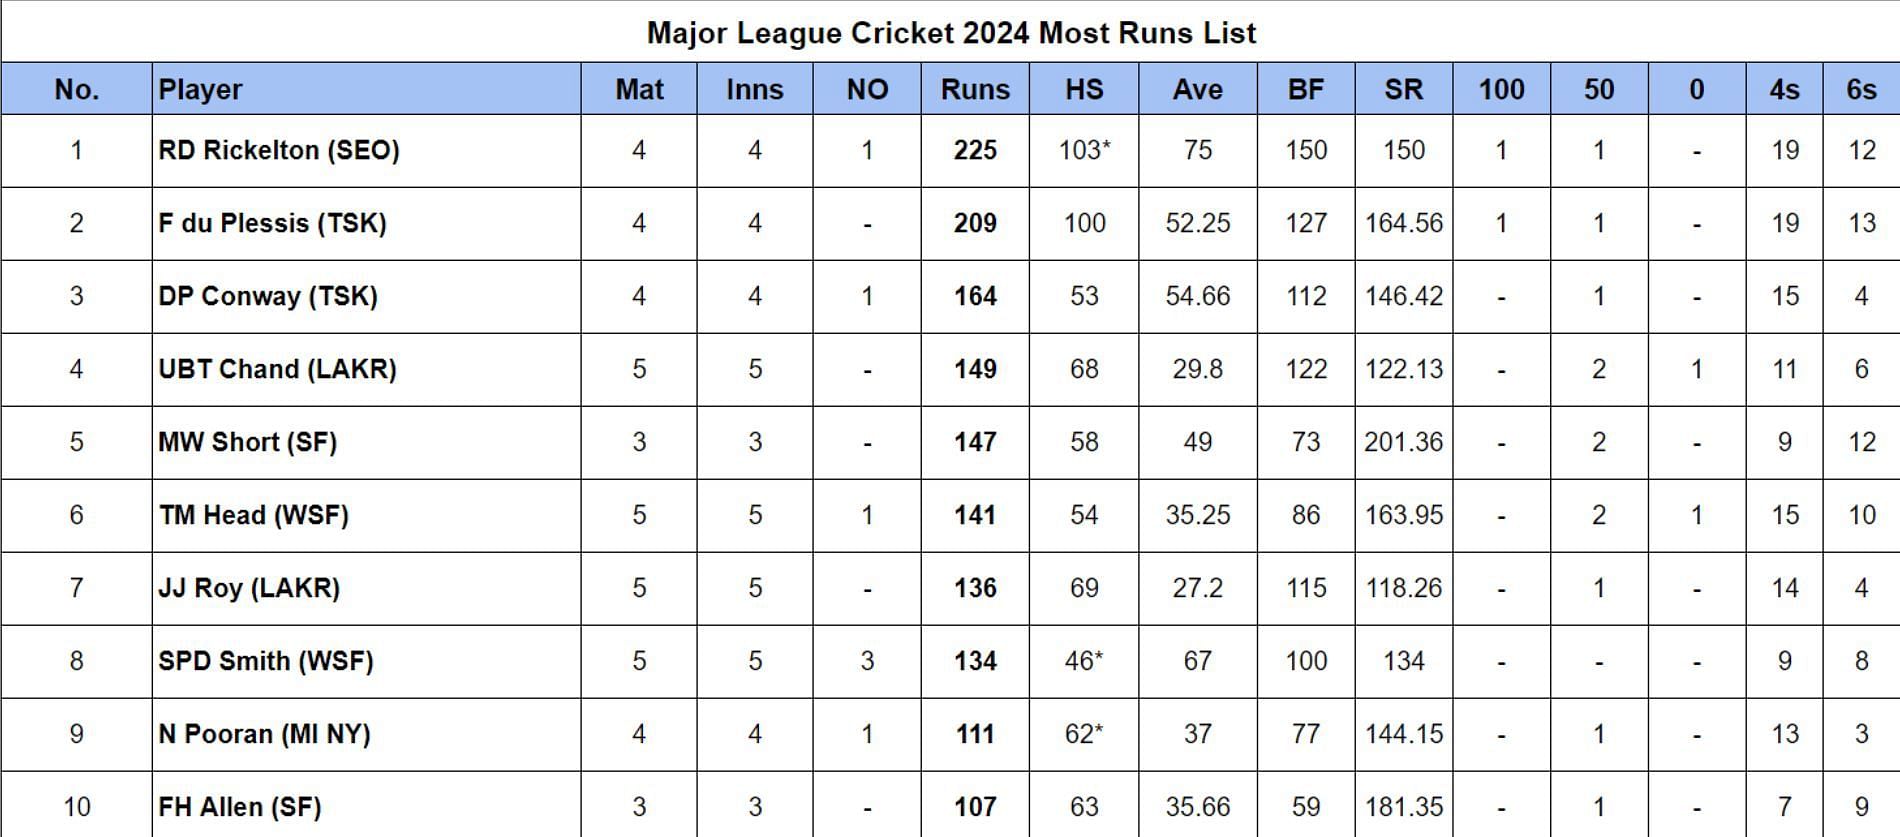 MLC 2024: Most Runs and Most Wickets after Seattle Orcas vs Los Angeles Knight Riders (Updated) ft. Ryan Rickelton & Cameron Gannon